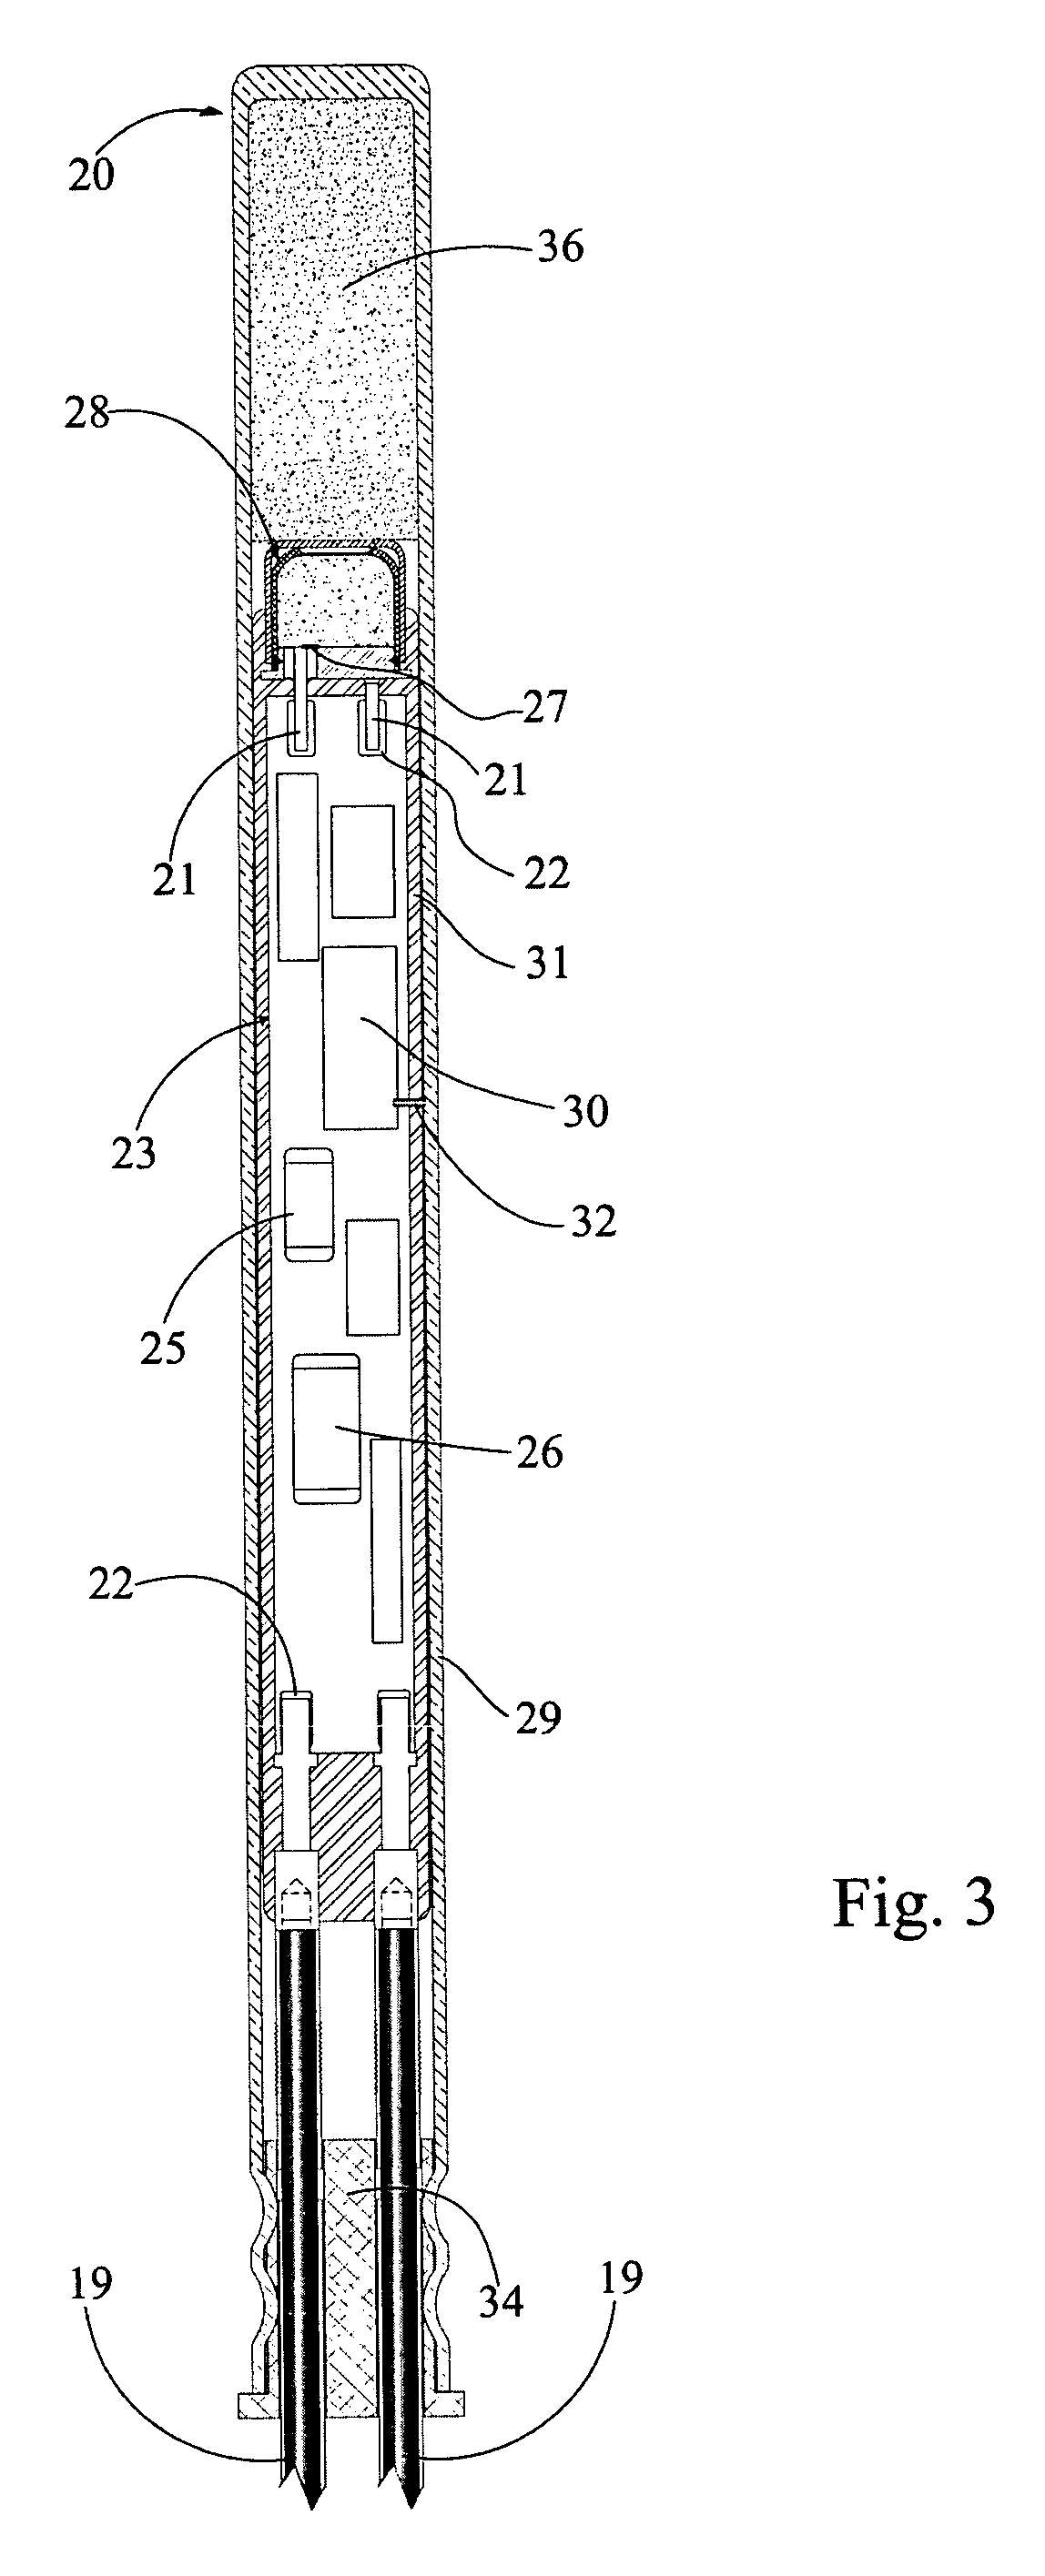 Status flags in a system of electronic pyrotechnic devices such as electronic detonators